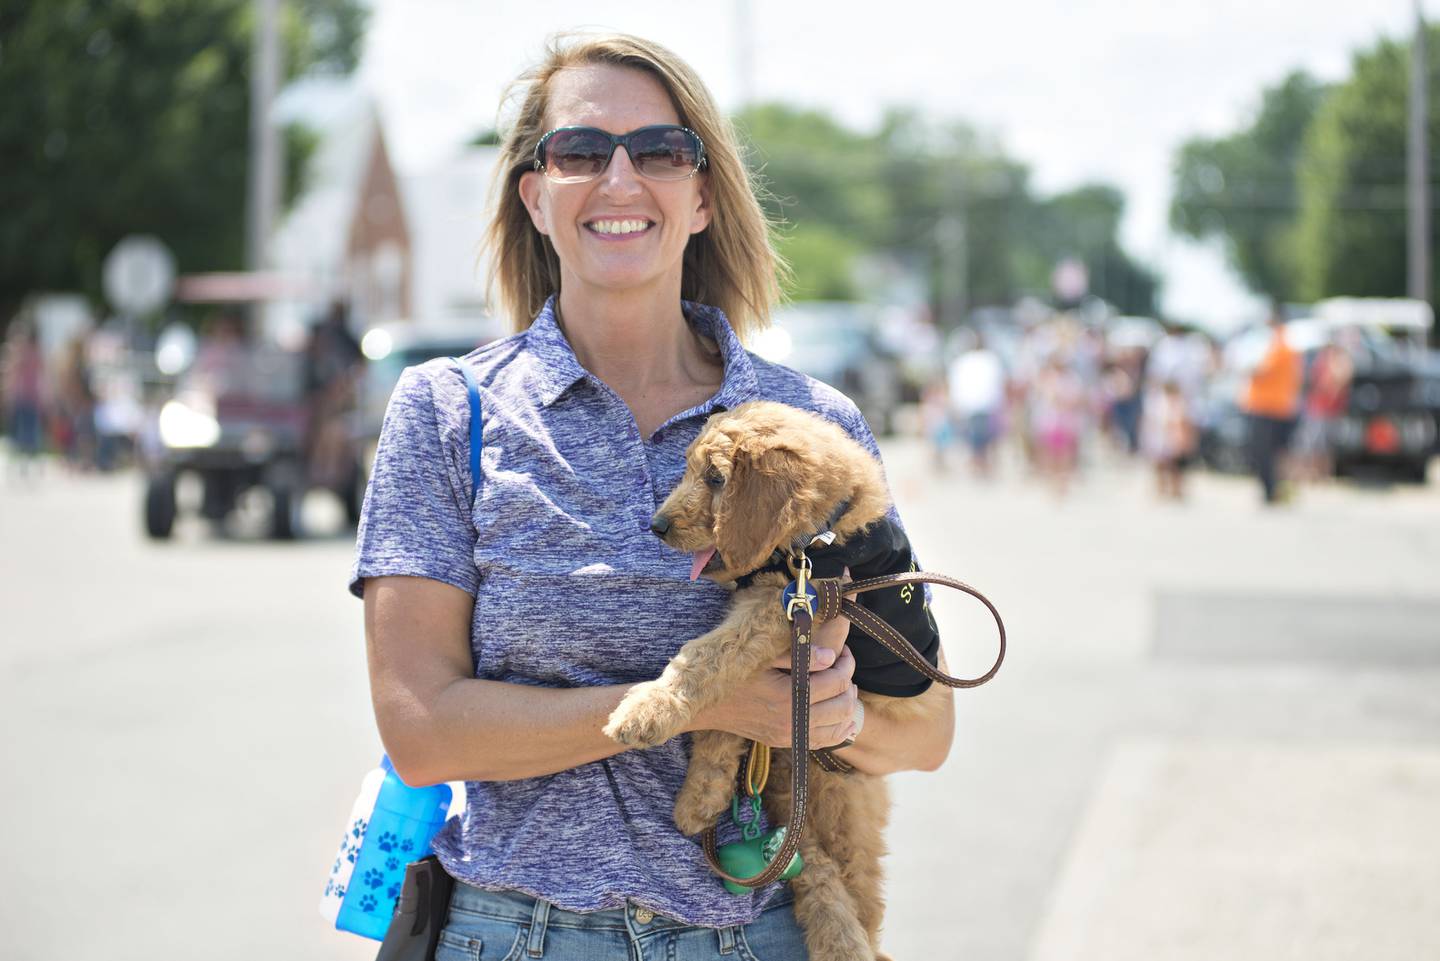 Kim Cavazos, jail administrator at Whiteside County, introduces Copper the county's new comfort dog to people in Tampico Sunday during the town's parade.